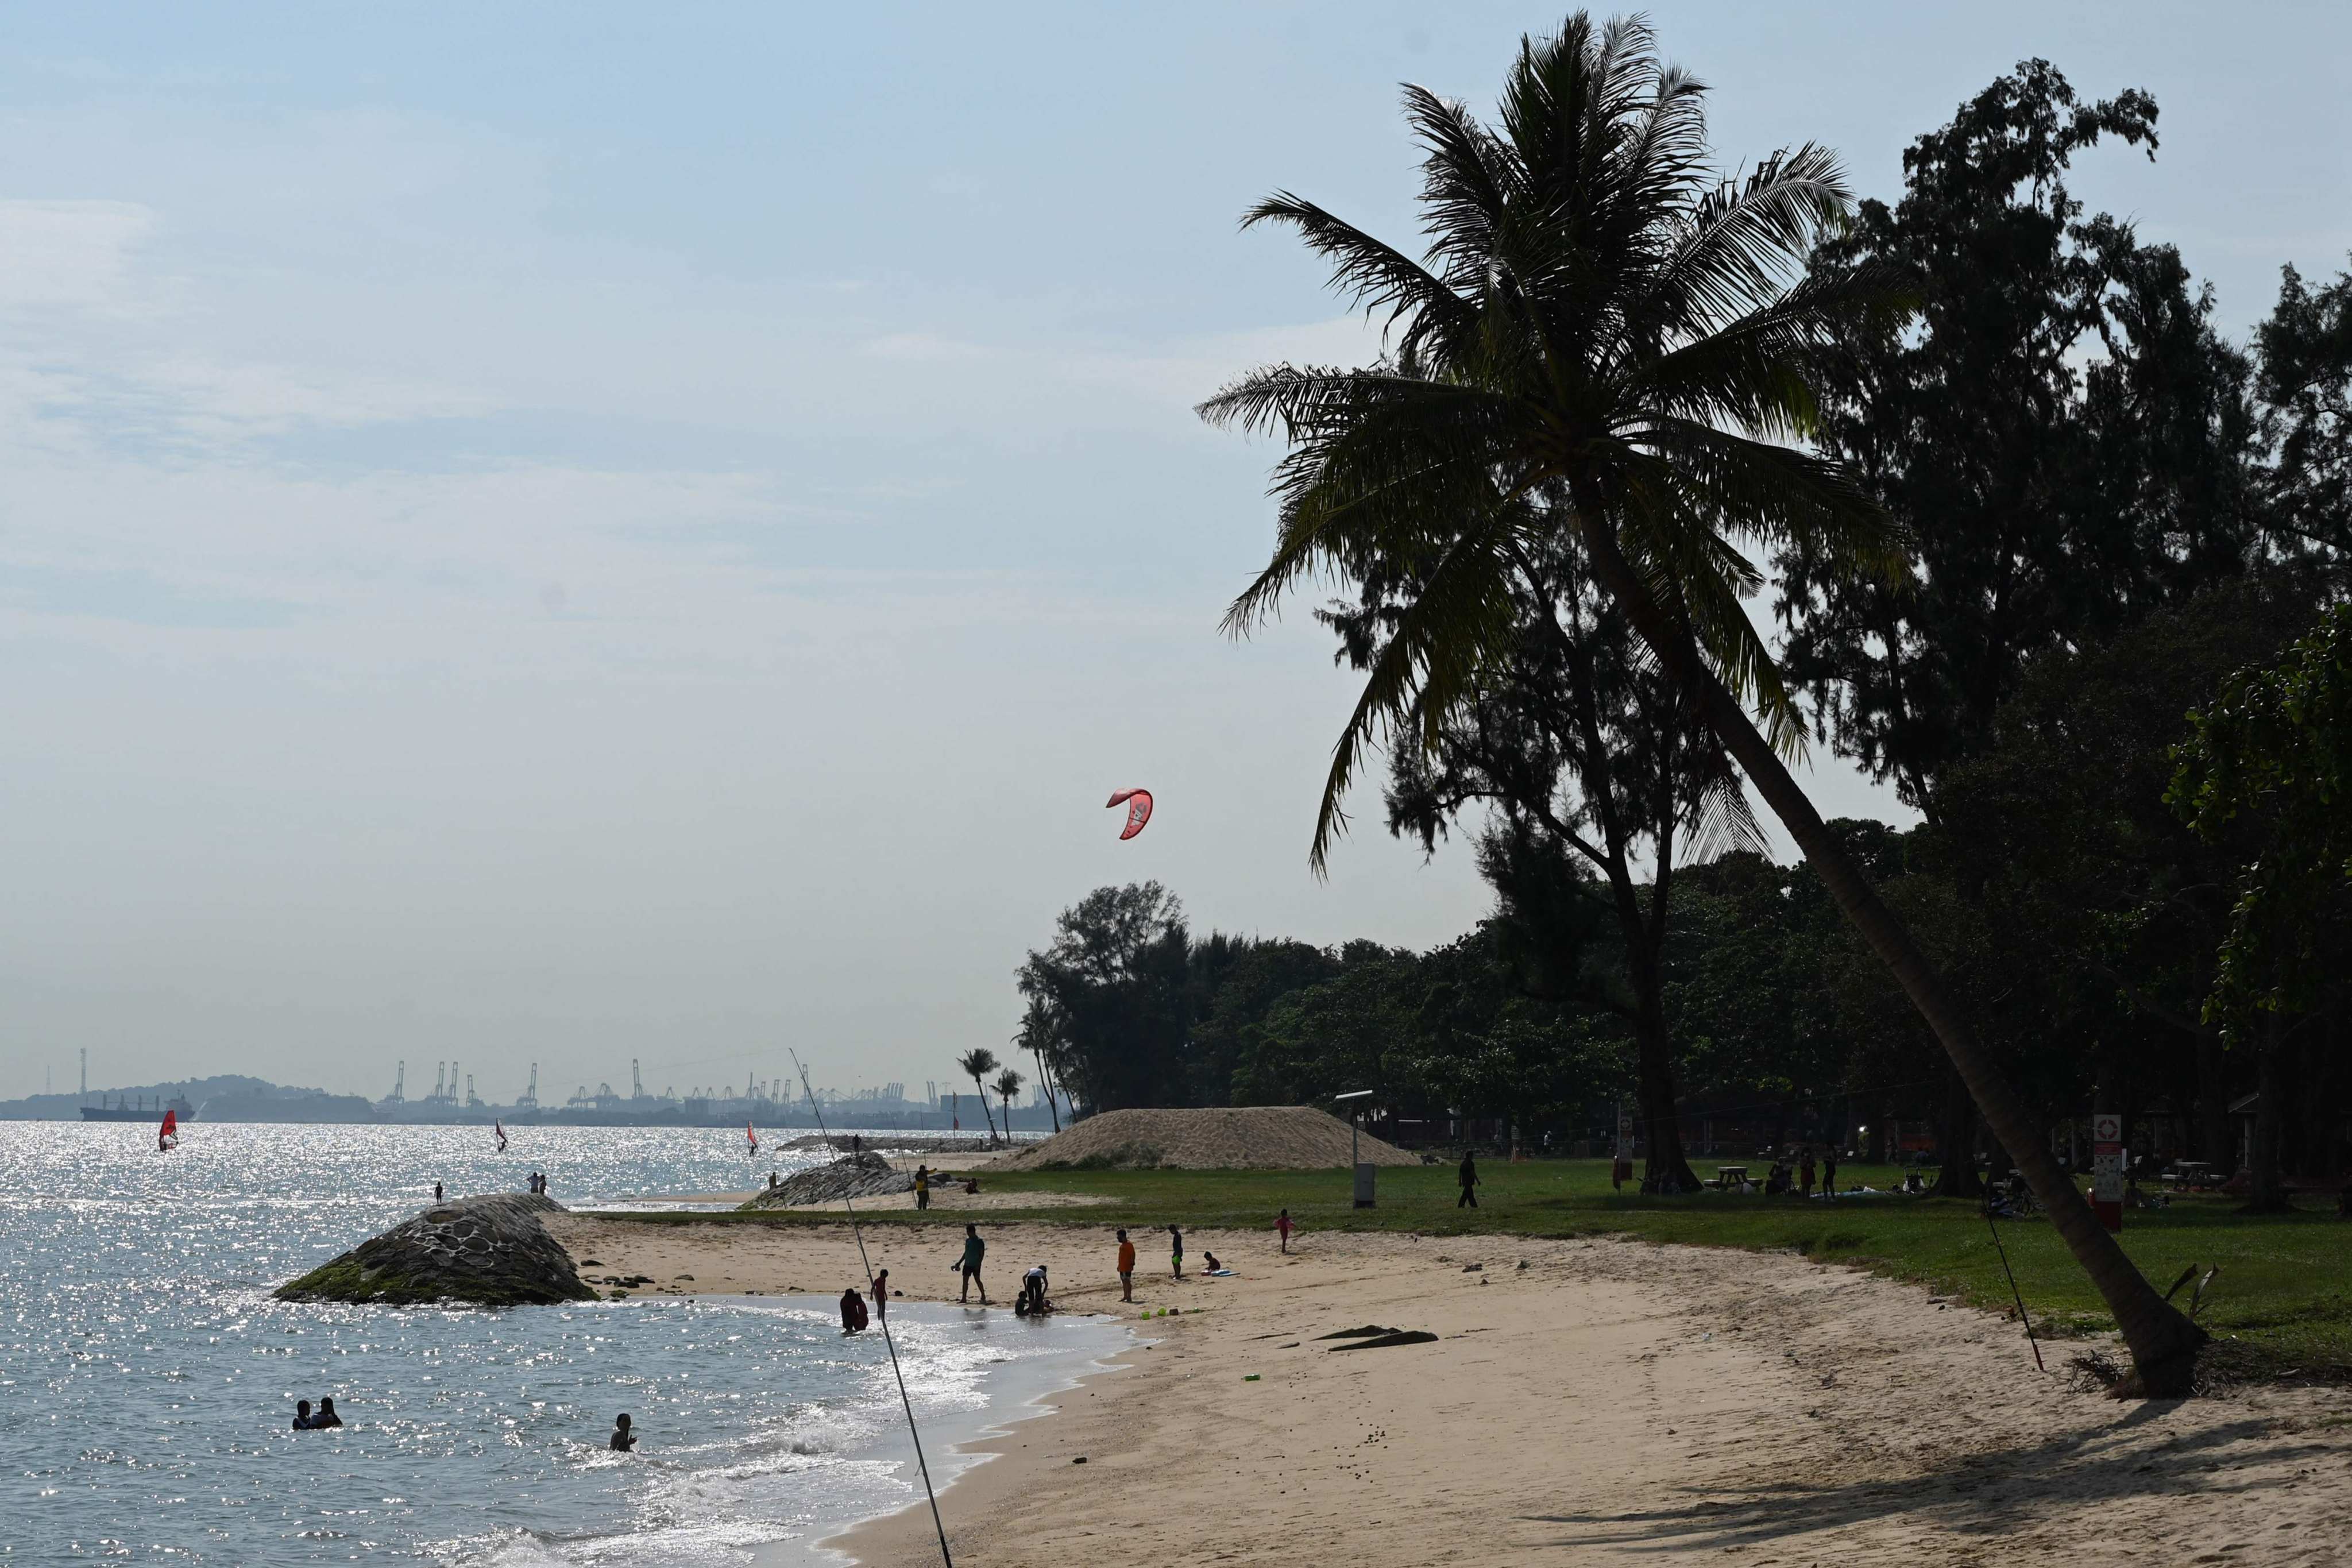 Singapore’s East Coast Park. On Tuesday, Singapore said it is considering building artificial islands off its east coast to protect low-lying areas against rising sea levels caused by climate change. Photo: AFP